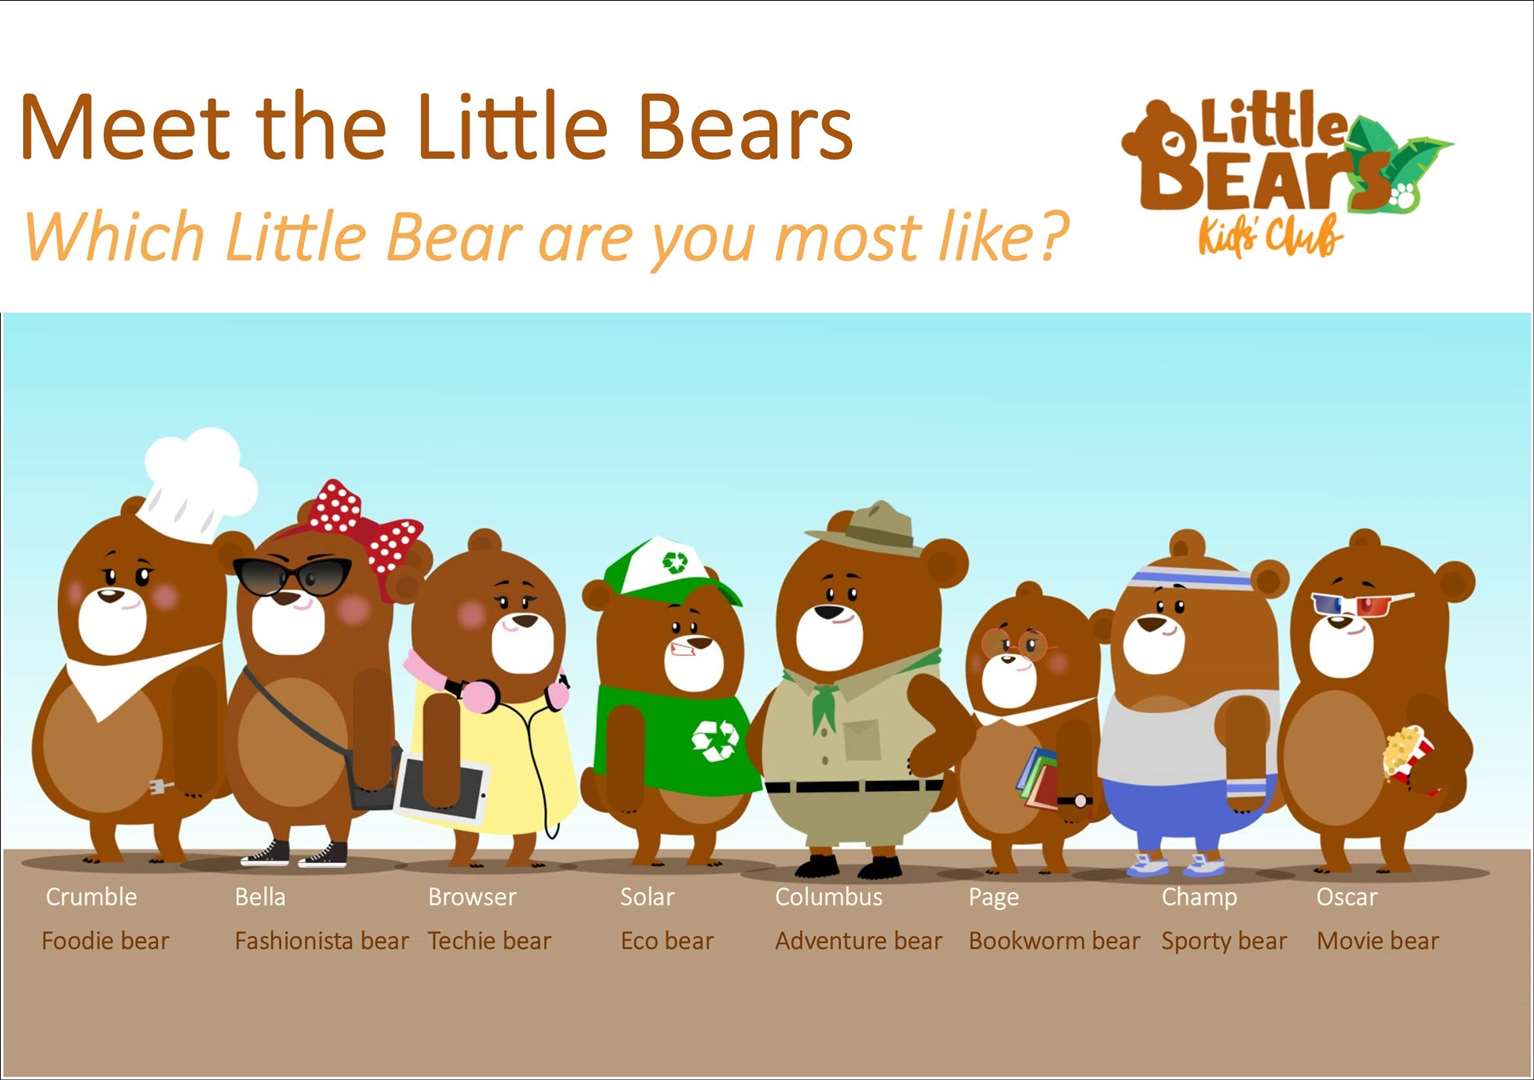 Join The Little Bears Kids’ Club for free to grab some great offers, including special deals for kids shoes and books!